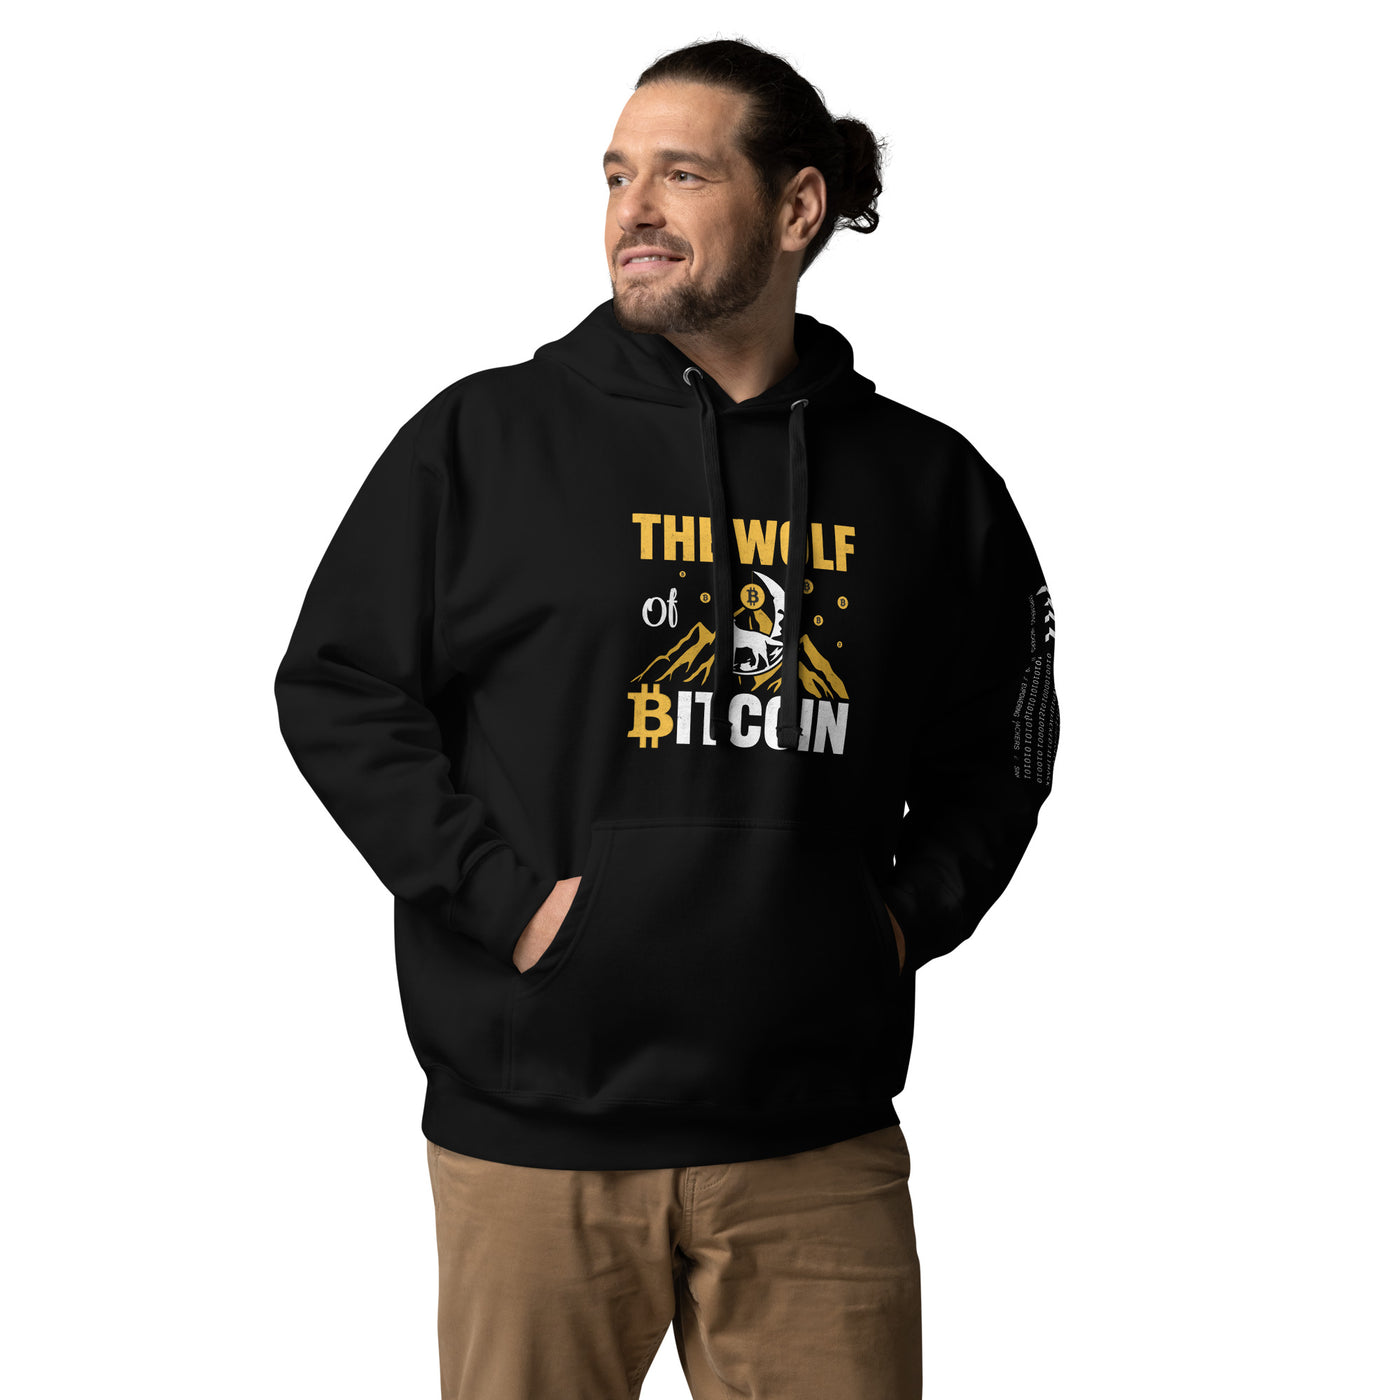 The Wolf of Bitcoin - Unisex Hoodie